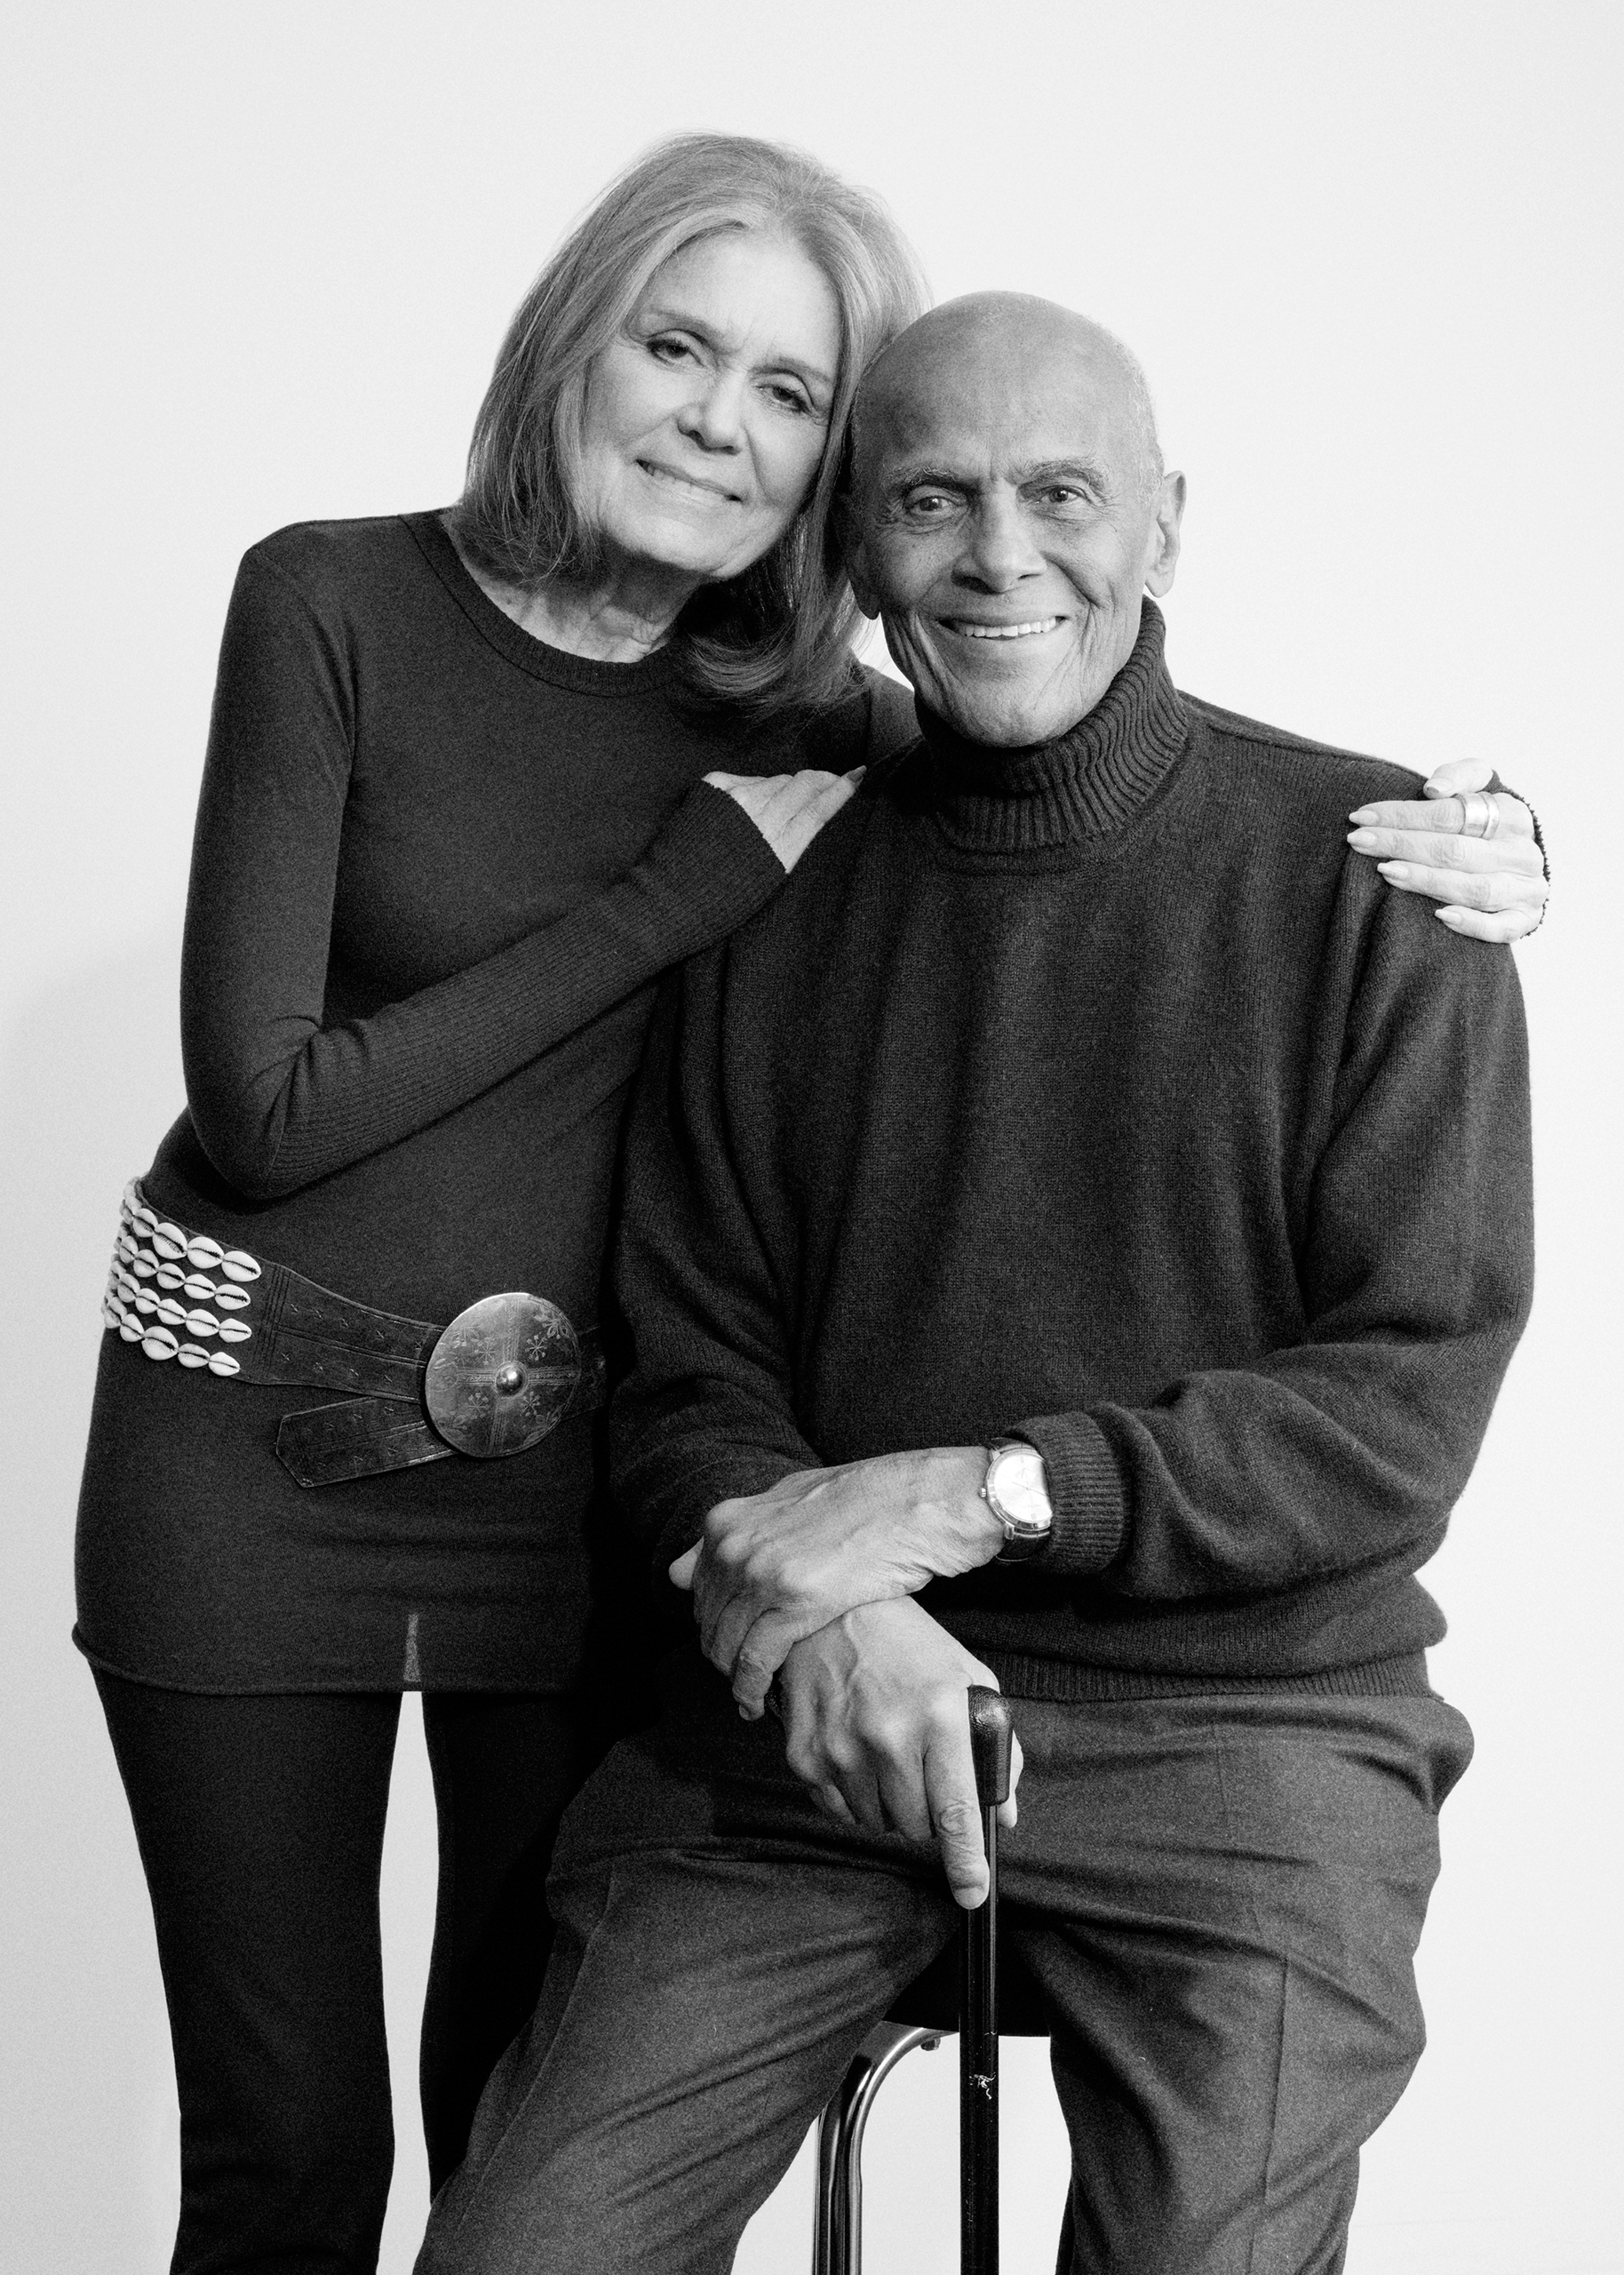 Honorary co-chairs for the Woman’s March on Washington. Gloria Steinem and Harry Belafonte in New York on Jan. 9, 2017